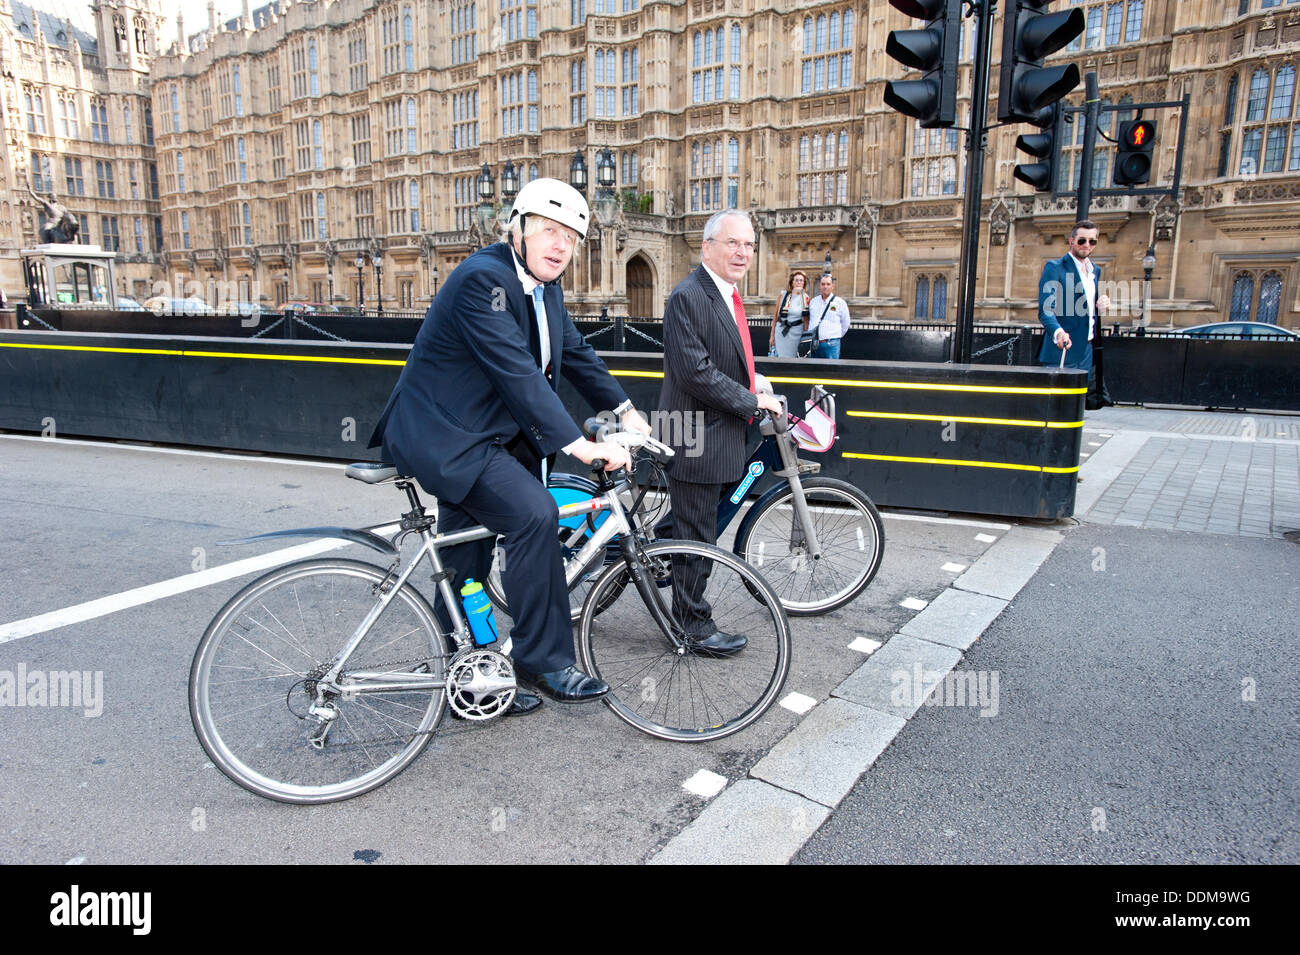 London, UK - 4 September 2013: the Mayor of London Boris Johnson and the London’s Transport Commissioner, Sir Peter Hendy, ride their bikes in Westminster after unveiling a number of measures to tackle Heavy Goods Vehicle (HGV) safety as part of a joint effort to boost cycling in the capital. Credit:  Piero Cruciatti/Alamy Live News Stock Photo